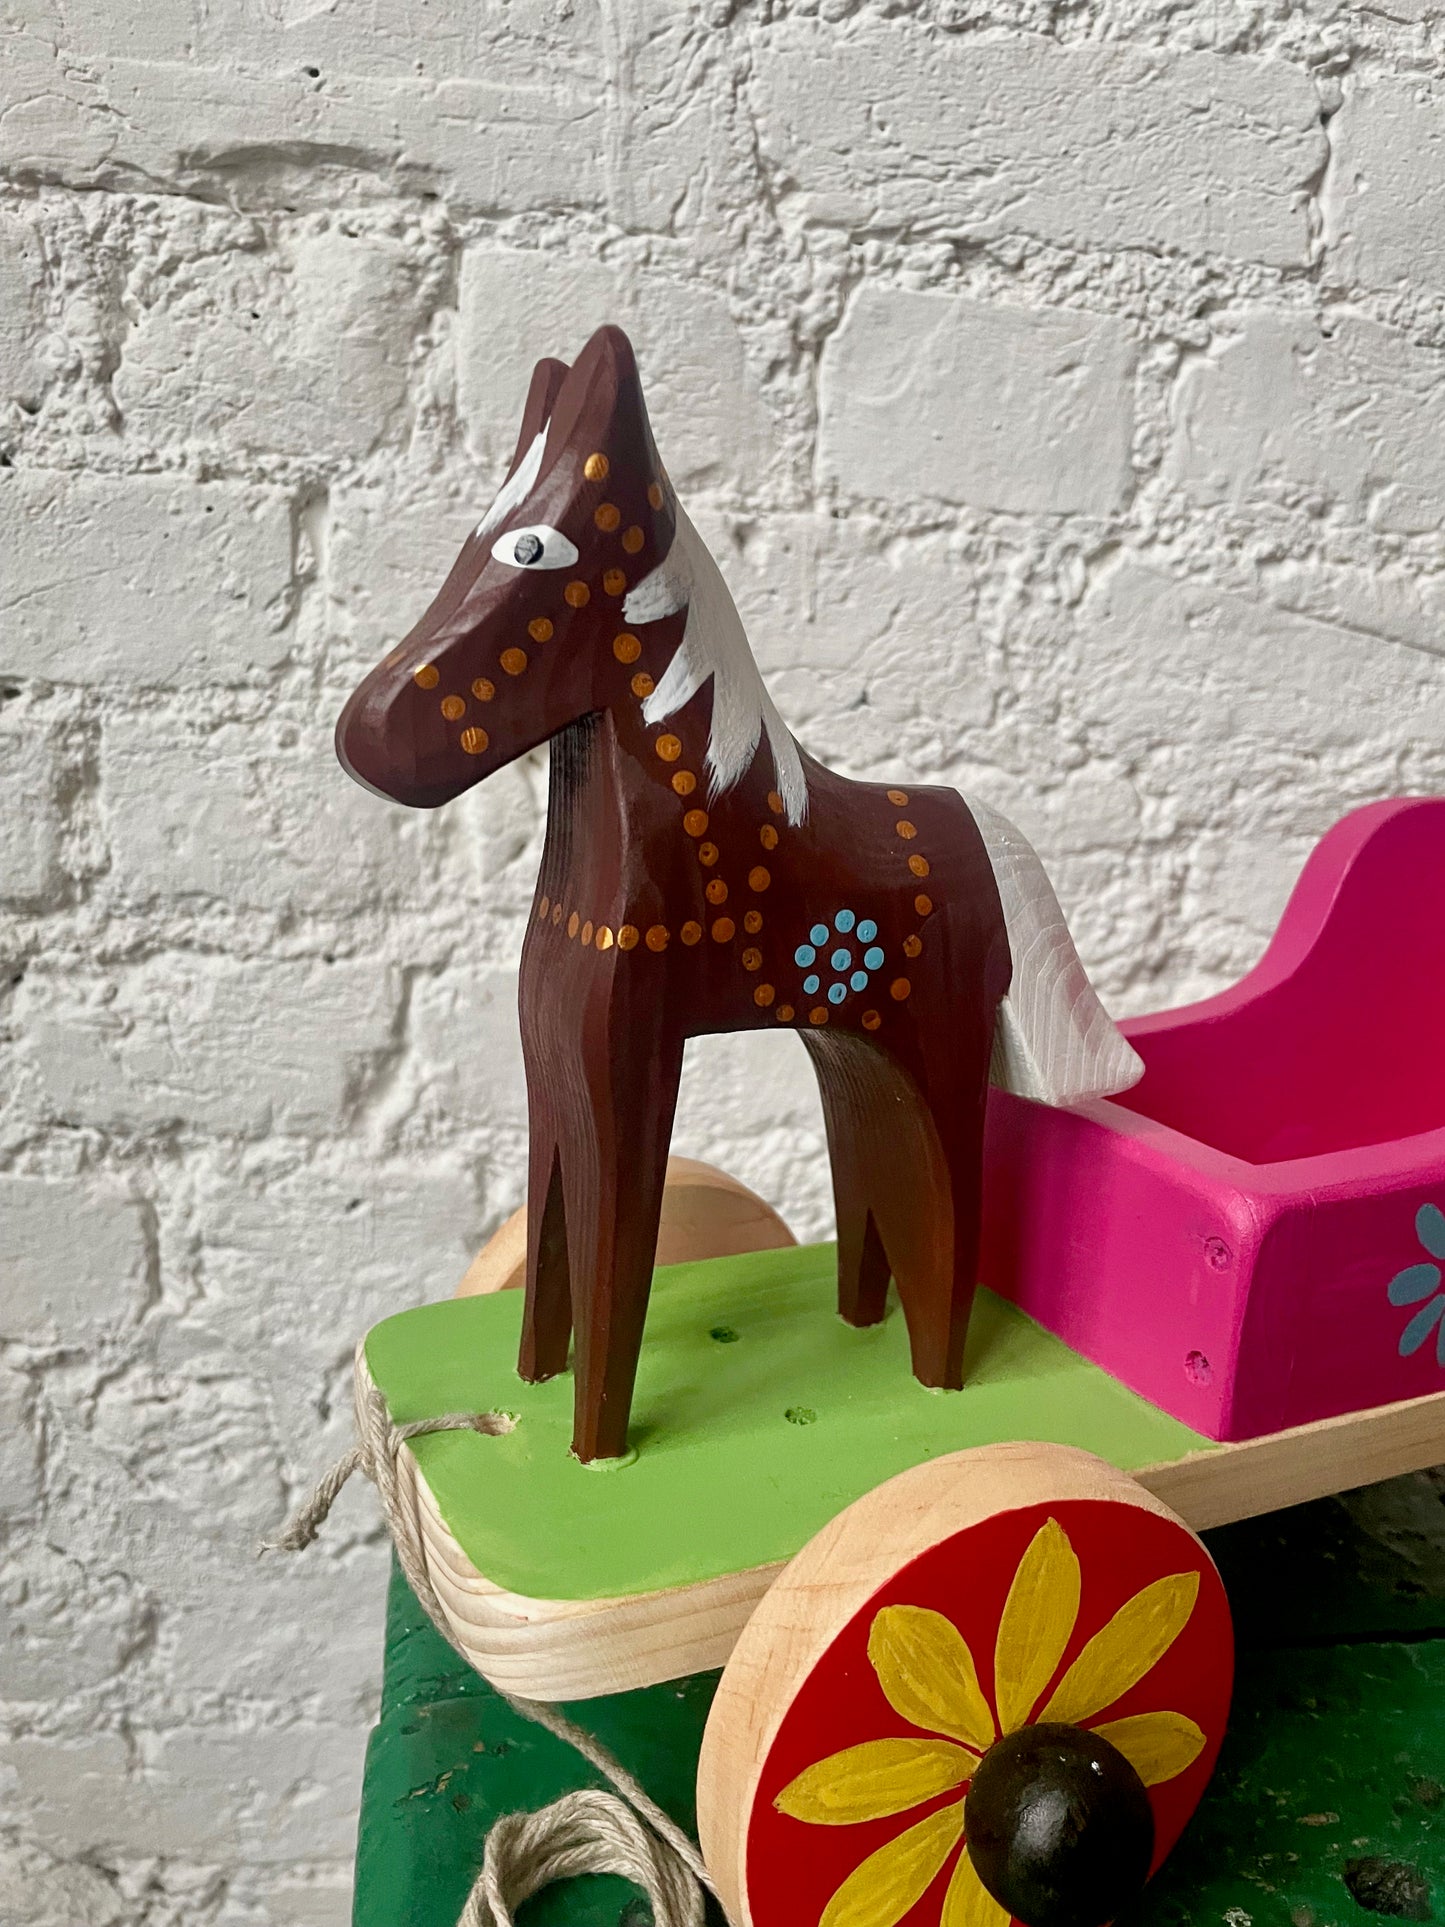 Brown Wooden Horse with Pink Cart Toy by Krzysztof